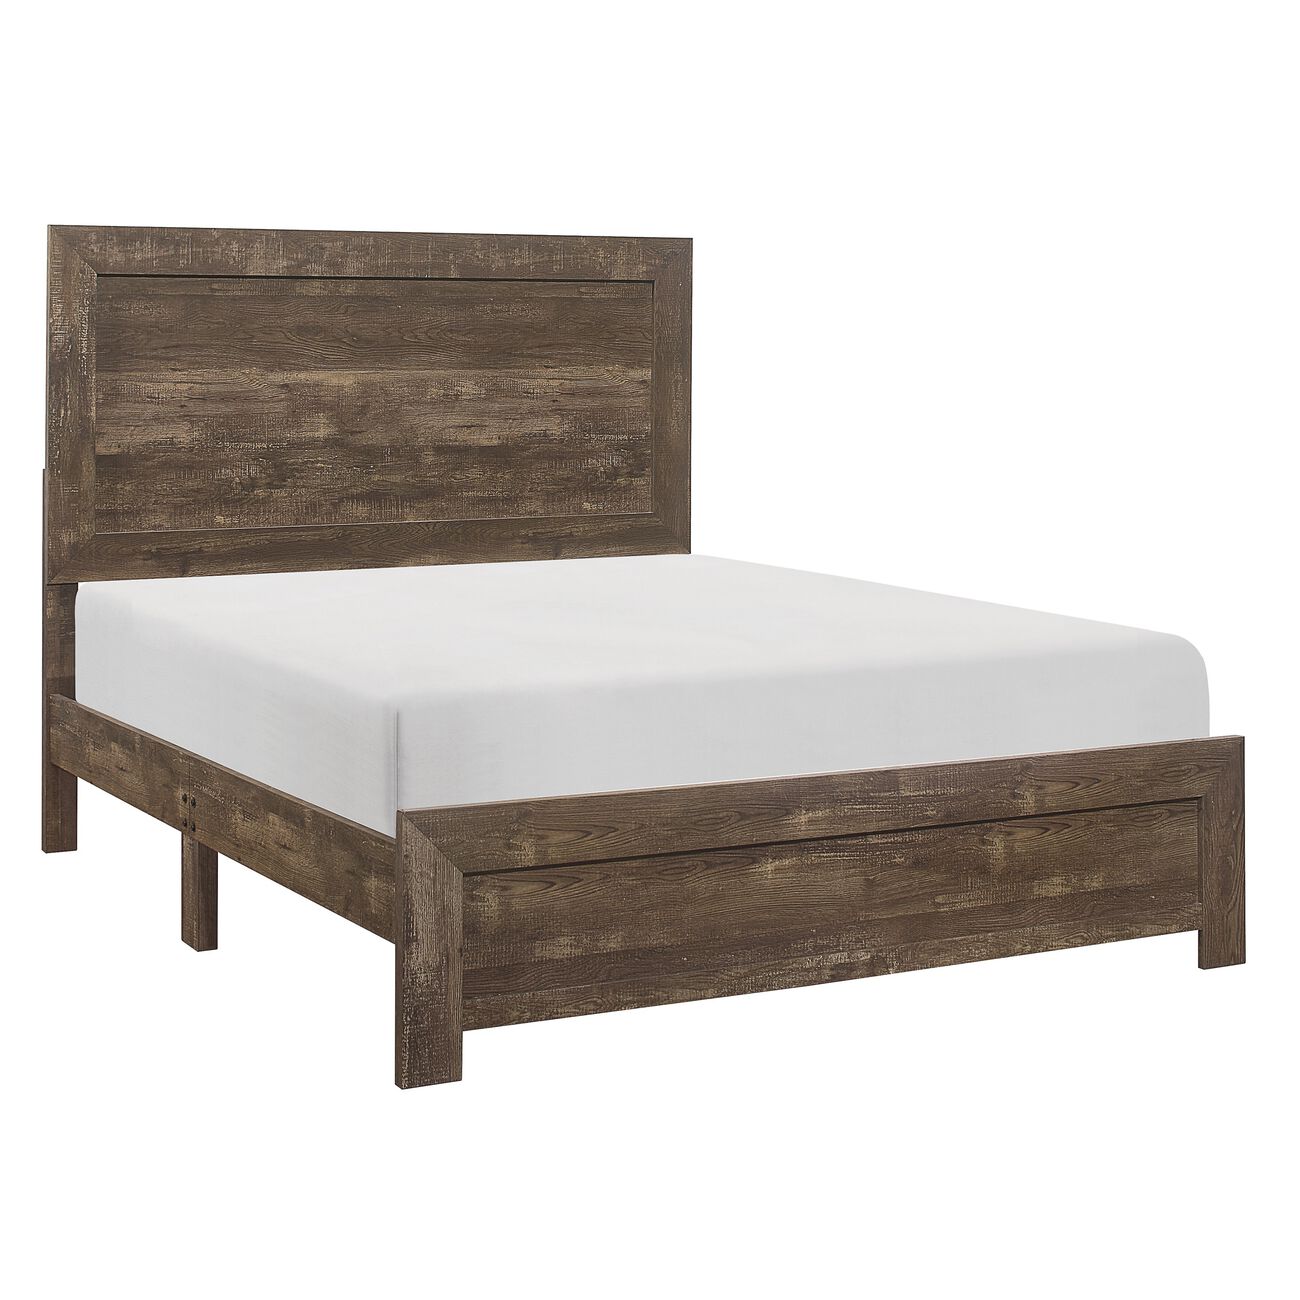 Rustic Panel Design Wooden California King Size Bed with Block Legs, Brown